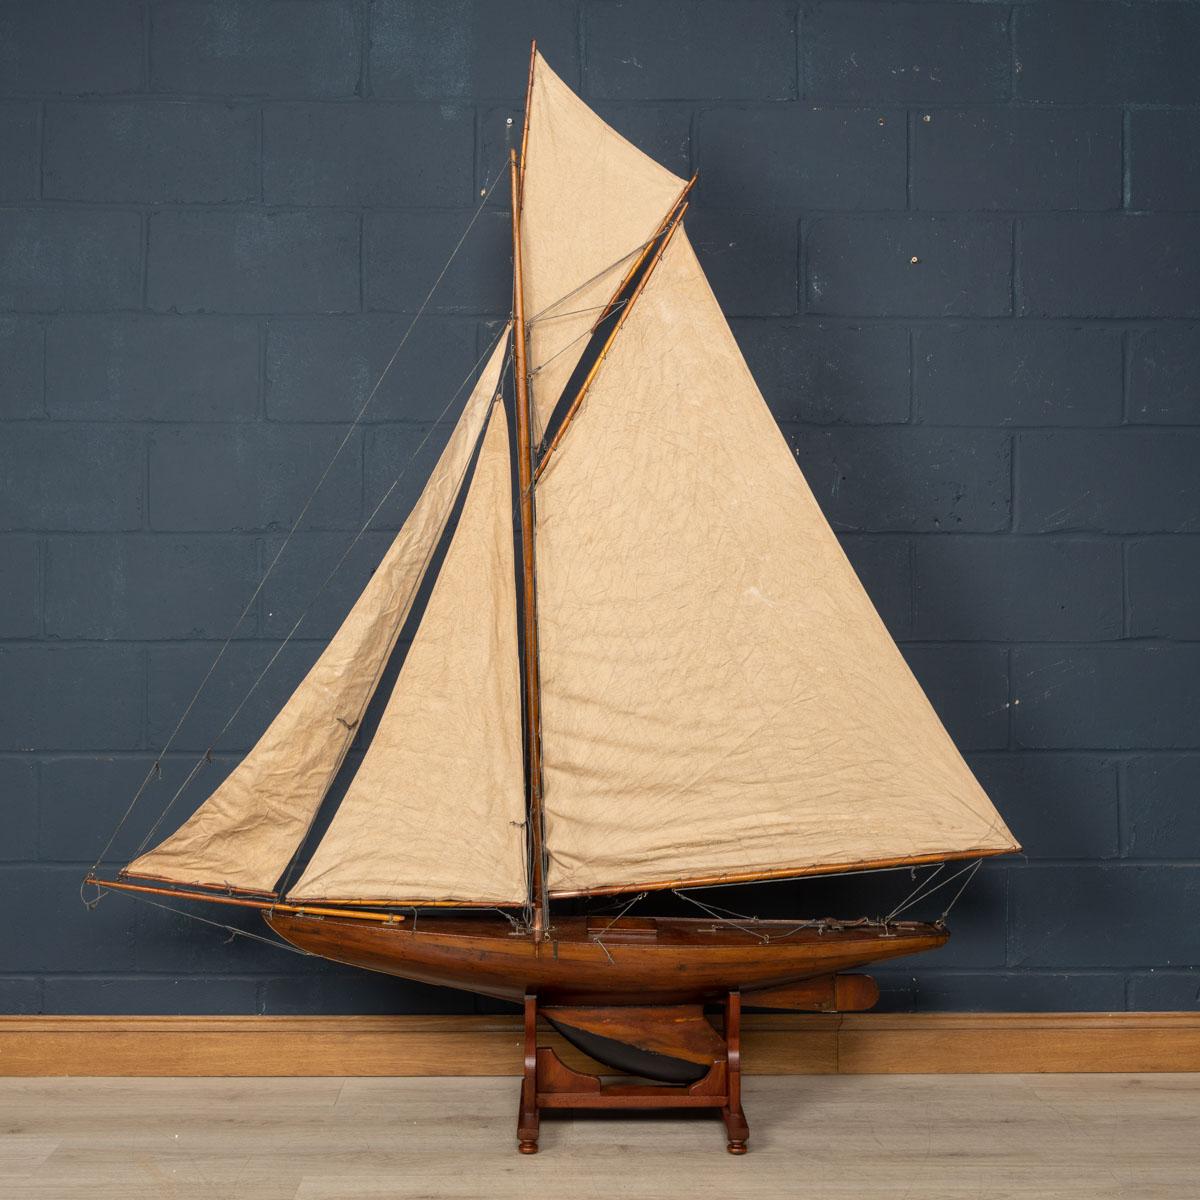 A fantastic antique Gaff Cutter pond yacht, lovely carved wood hull dating to the first half of the 20th century.

CONDITION
In Great Condition - Completely reconditioned to perfection.

SIZE
Width: 173cm
Depth: 25cm
Height: 200cm
Stand